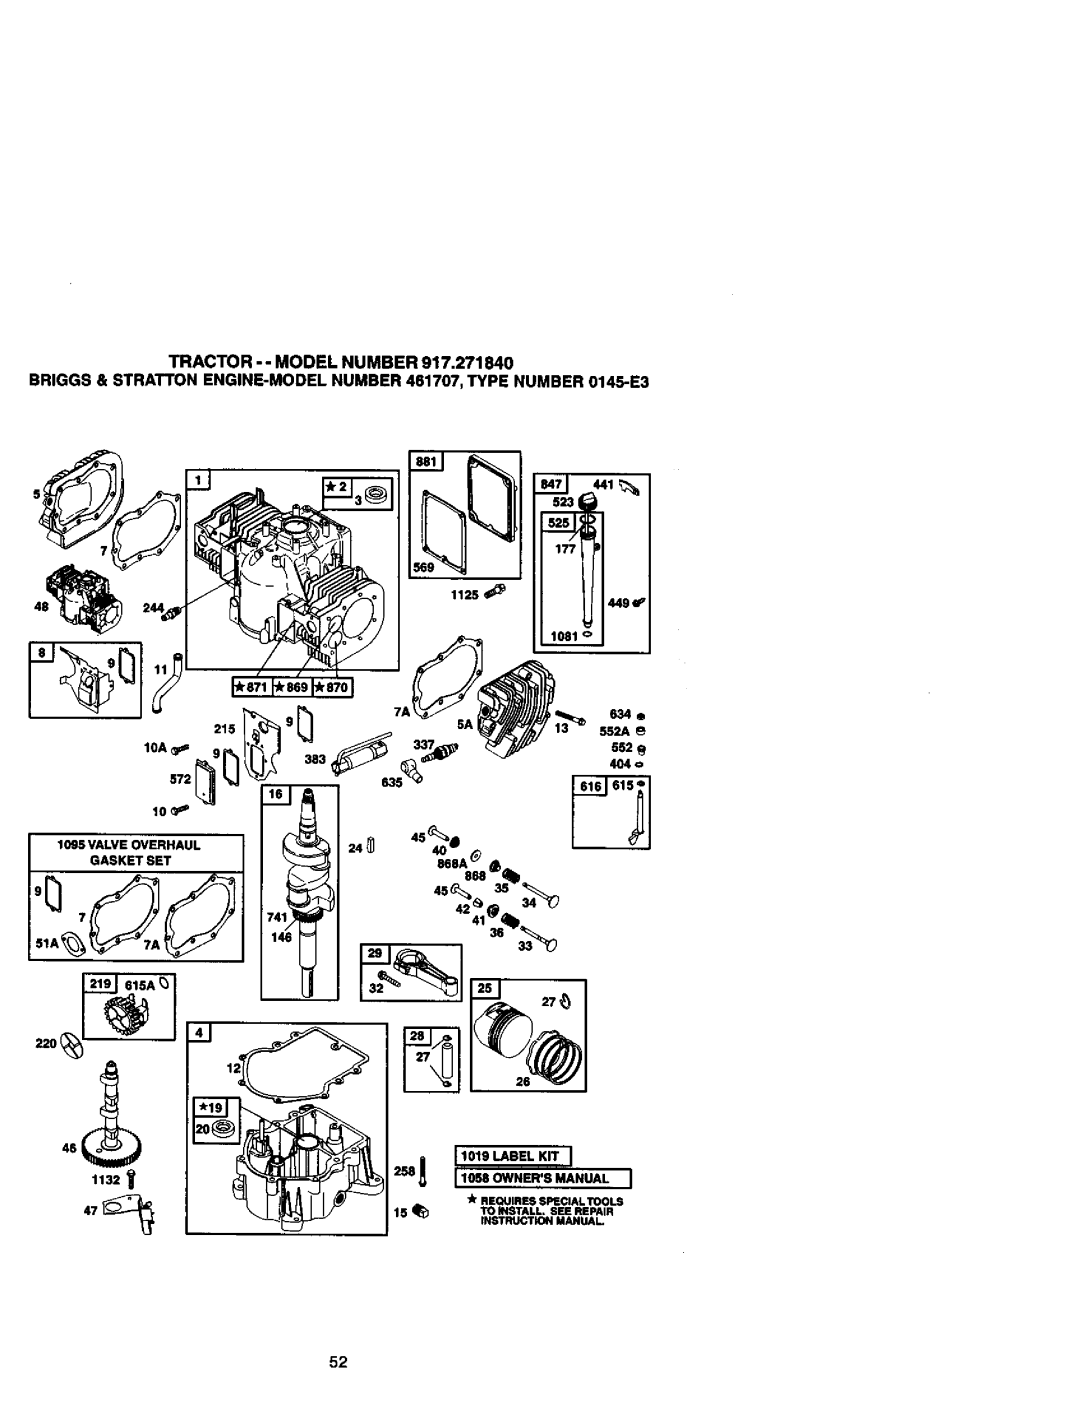 Craftsman 917.27184 523, 1132, i 1058 OWNERSMANUAL, Instructionmanual, k REQUIRES, Special Tools, To Install, See Repair 